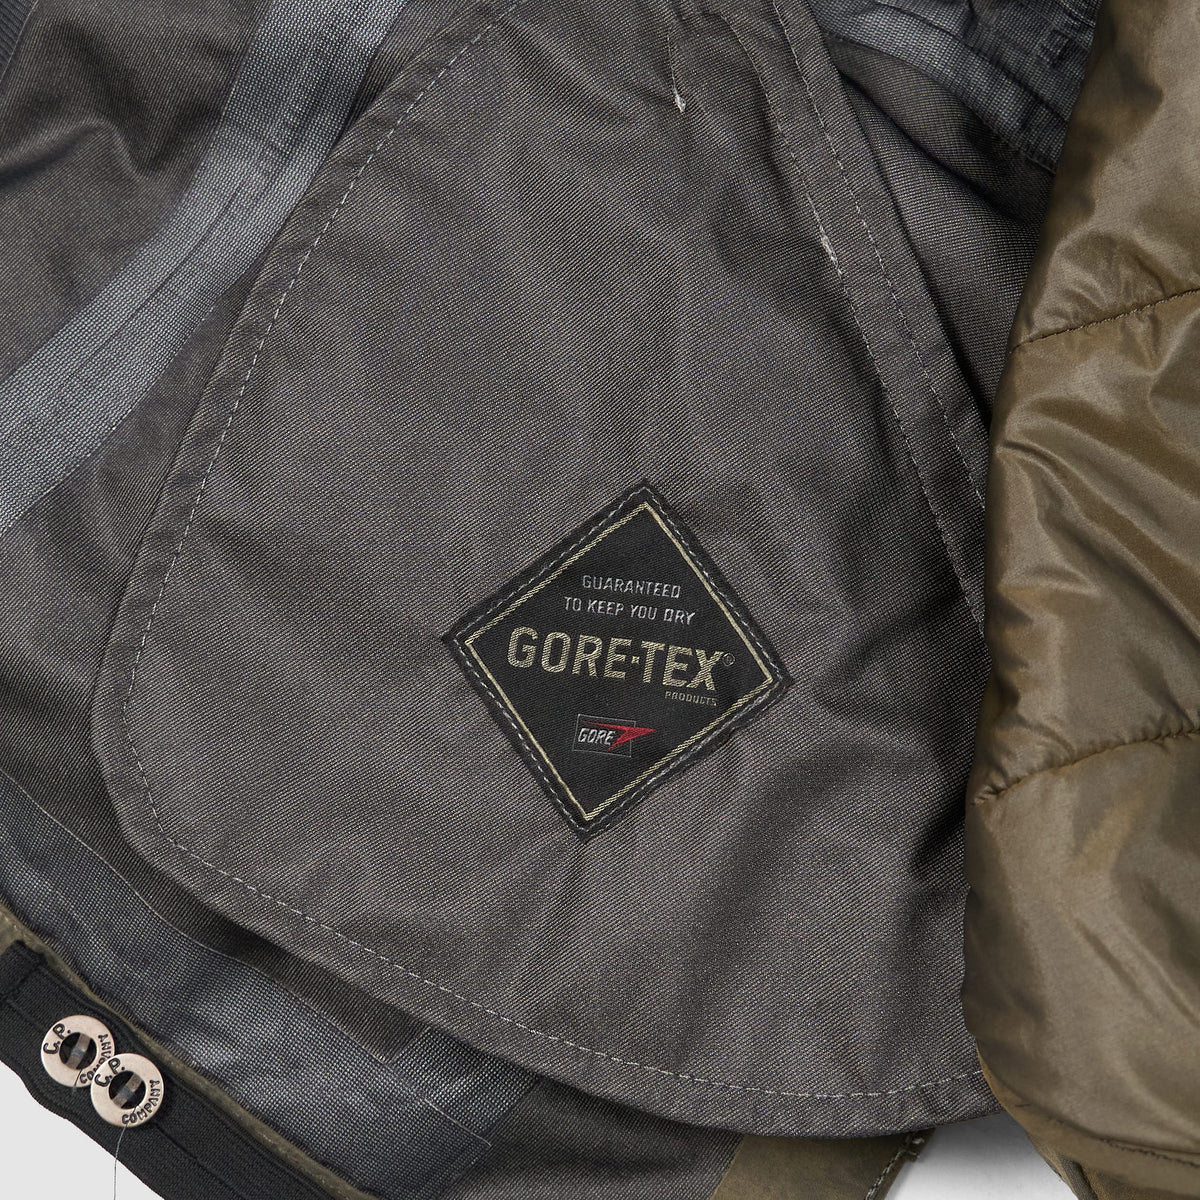 C.P. Company Goggle Gore-Tex Jacket Designed by Aitor Throup